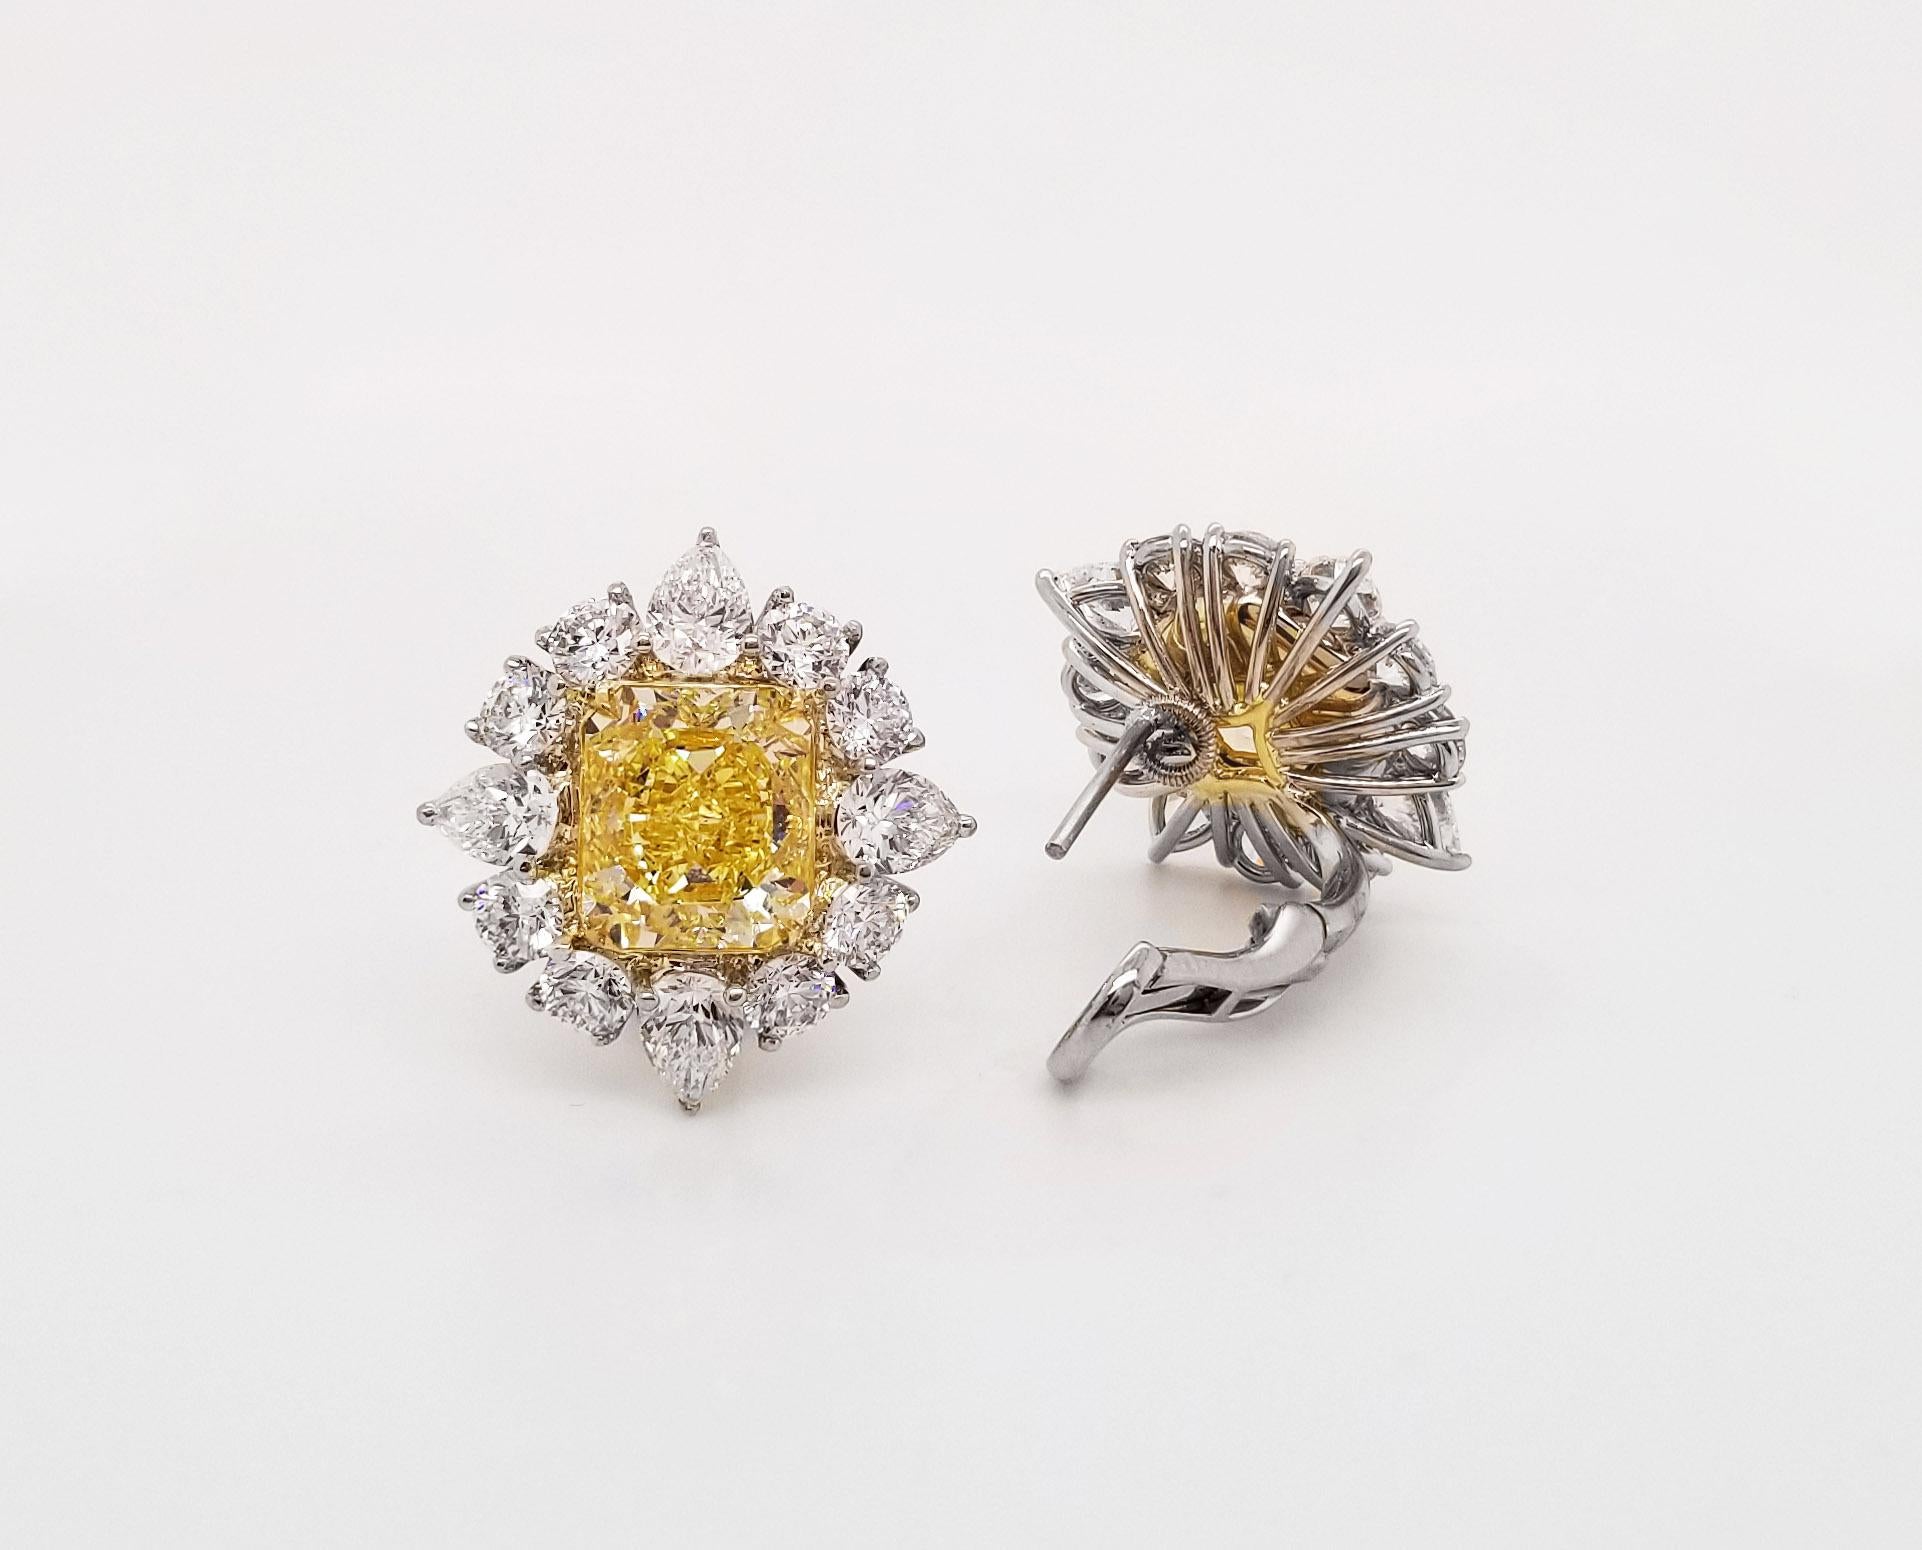 Contemporary Scarselli 18k & Platinum Earrings 3 Carat Fancy Intense Yellow Each GIA For Sale